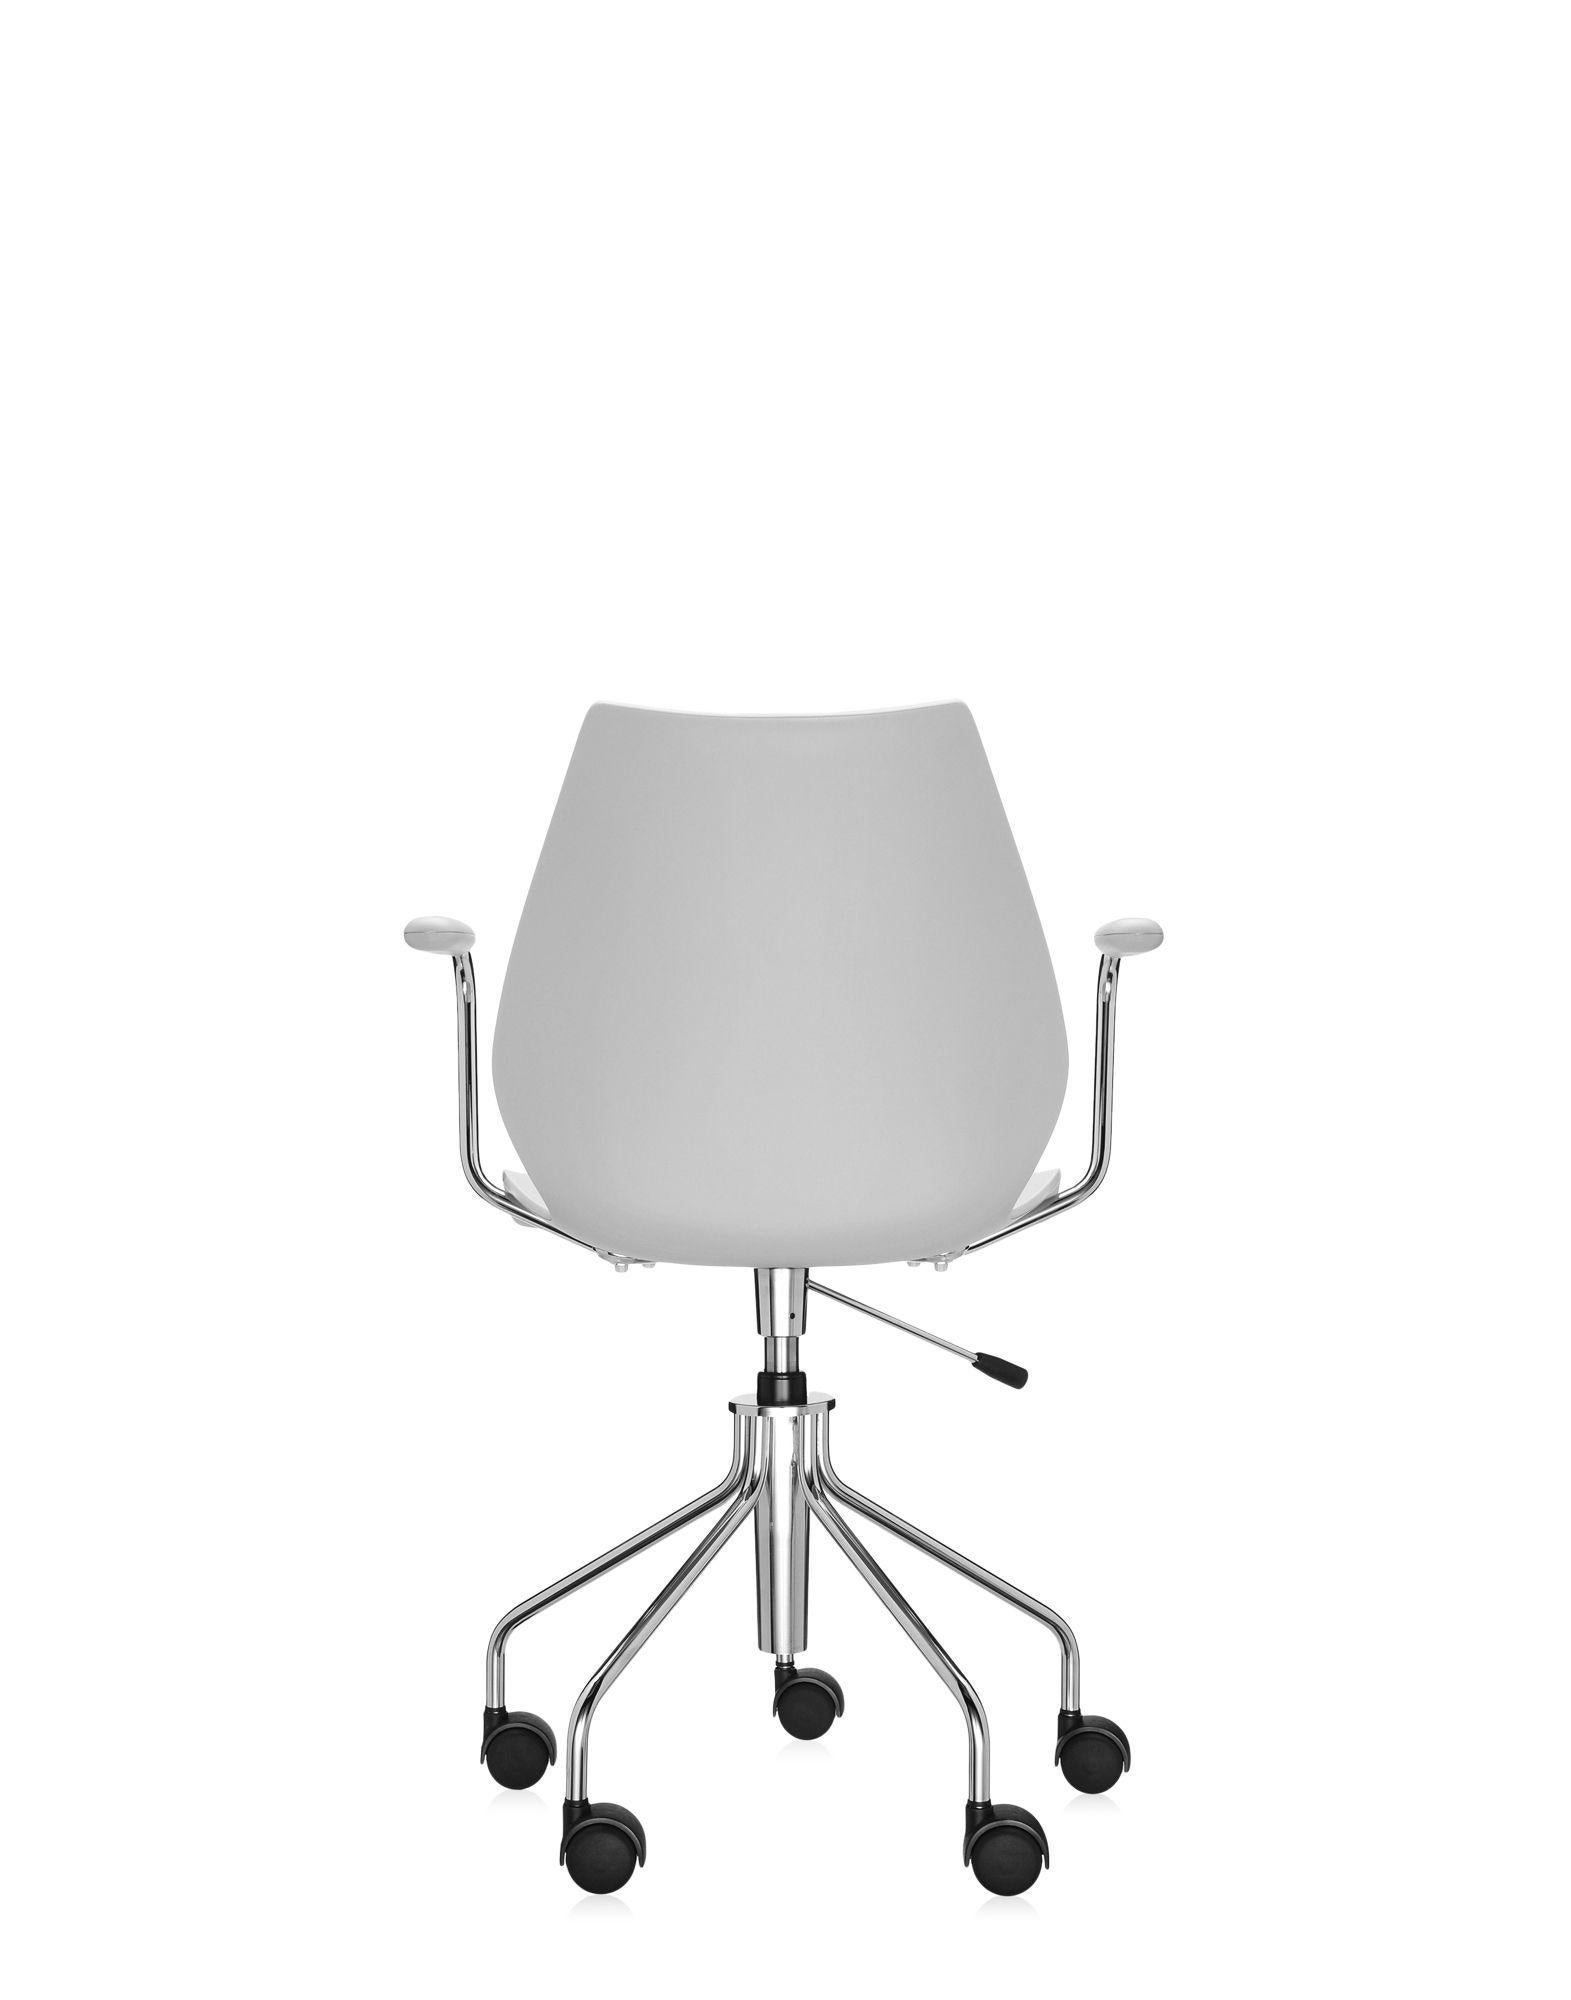 Modern Kartell Maui Swivel Chair Adjustable in Pale Grey by Vico Magistretti